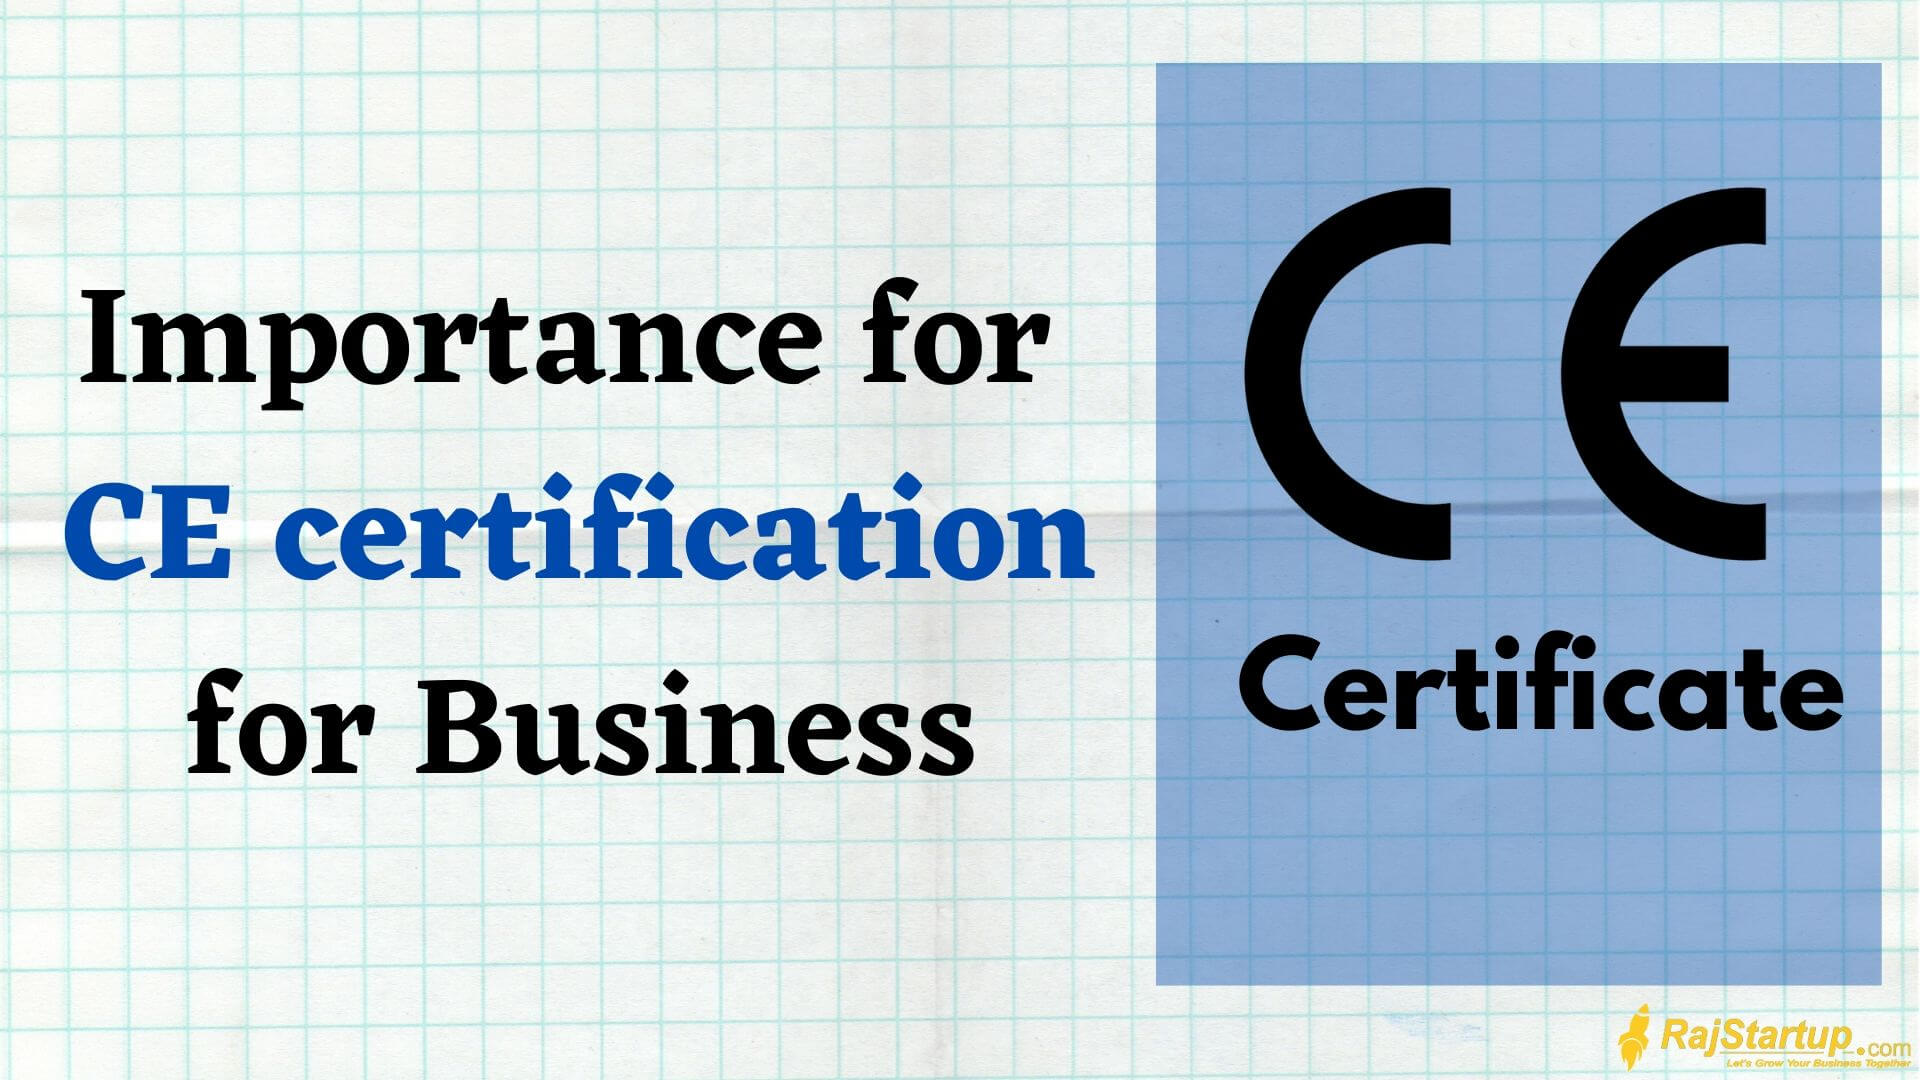 What is the CE Certification and why it is important for organizations